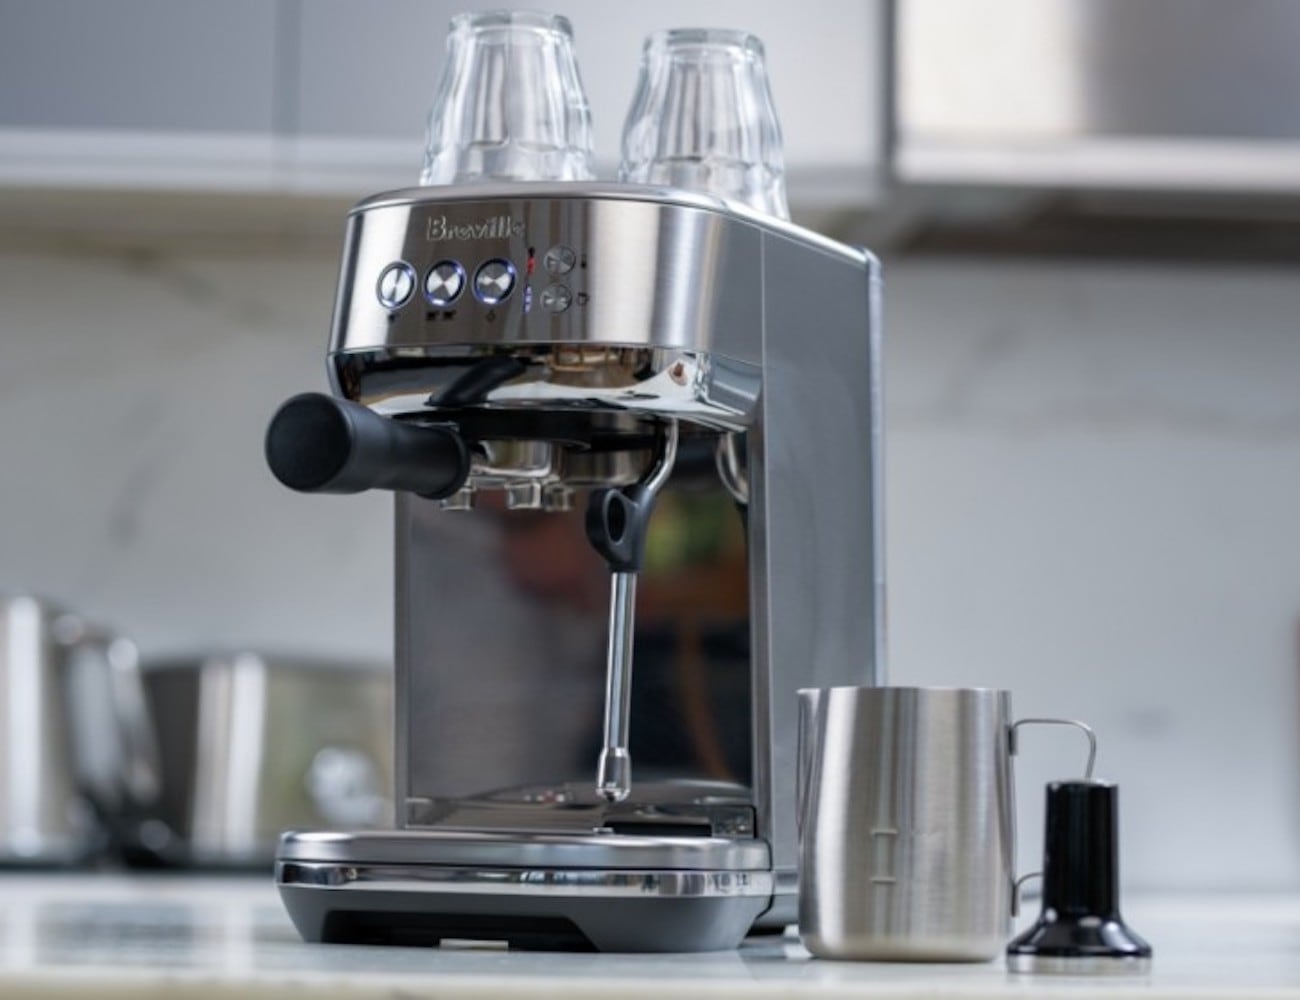 The best affordable espresso machines you can buy in 2019 - Breville Bambino Plus 2